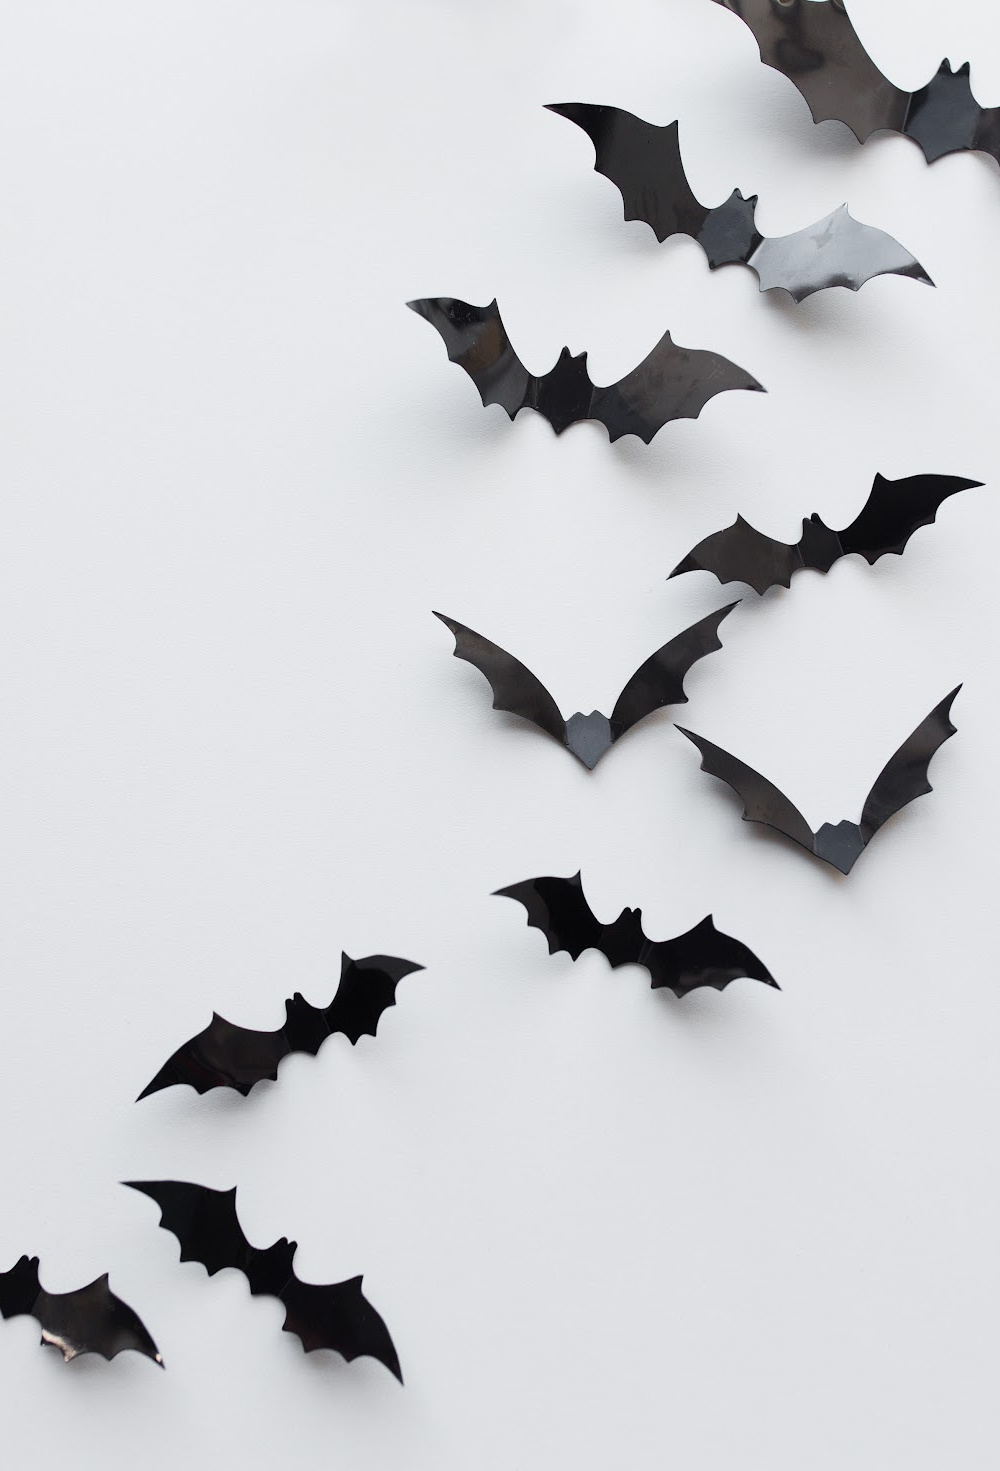 You Can Get The Most Adorable Bat Candle Just in Time for Halloween